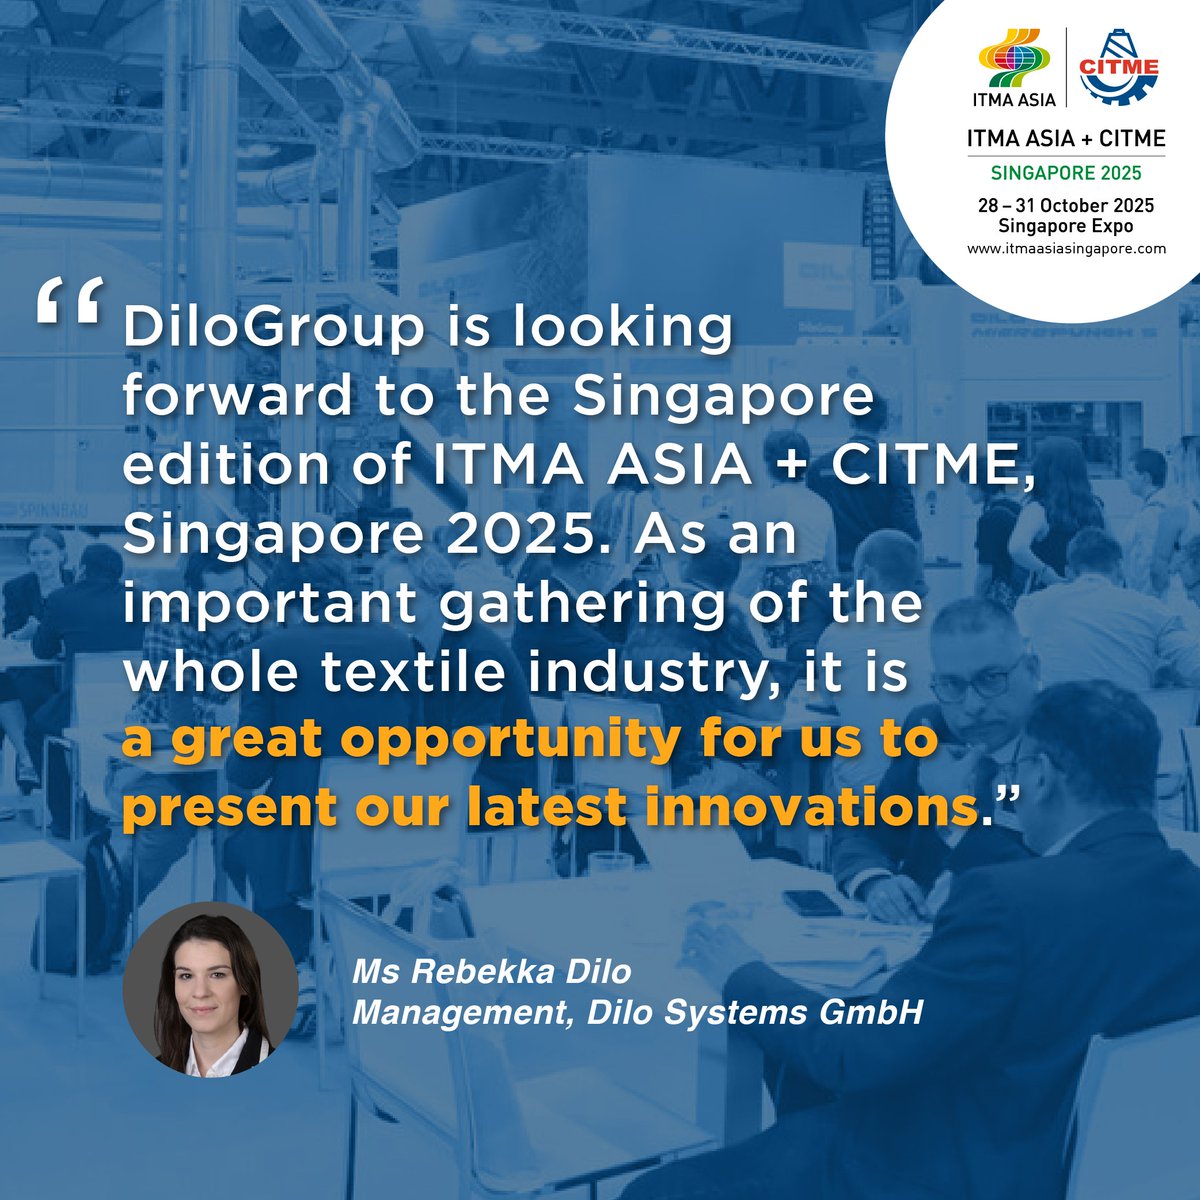 Be one of the 600 companies expected to   secure a spot at #ITMAasiaCITMEsg2025. Stand space application is now open.

Find out why   you should exhibit: itmaasiasingapore.com/exhibitors/why…

#ITMA #TextileInnovation #TextileTechnology #TextileManufacturing